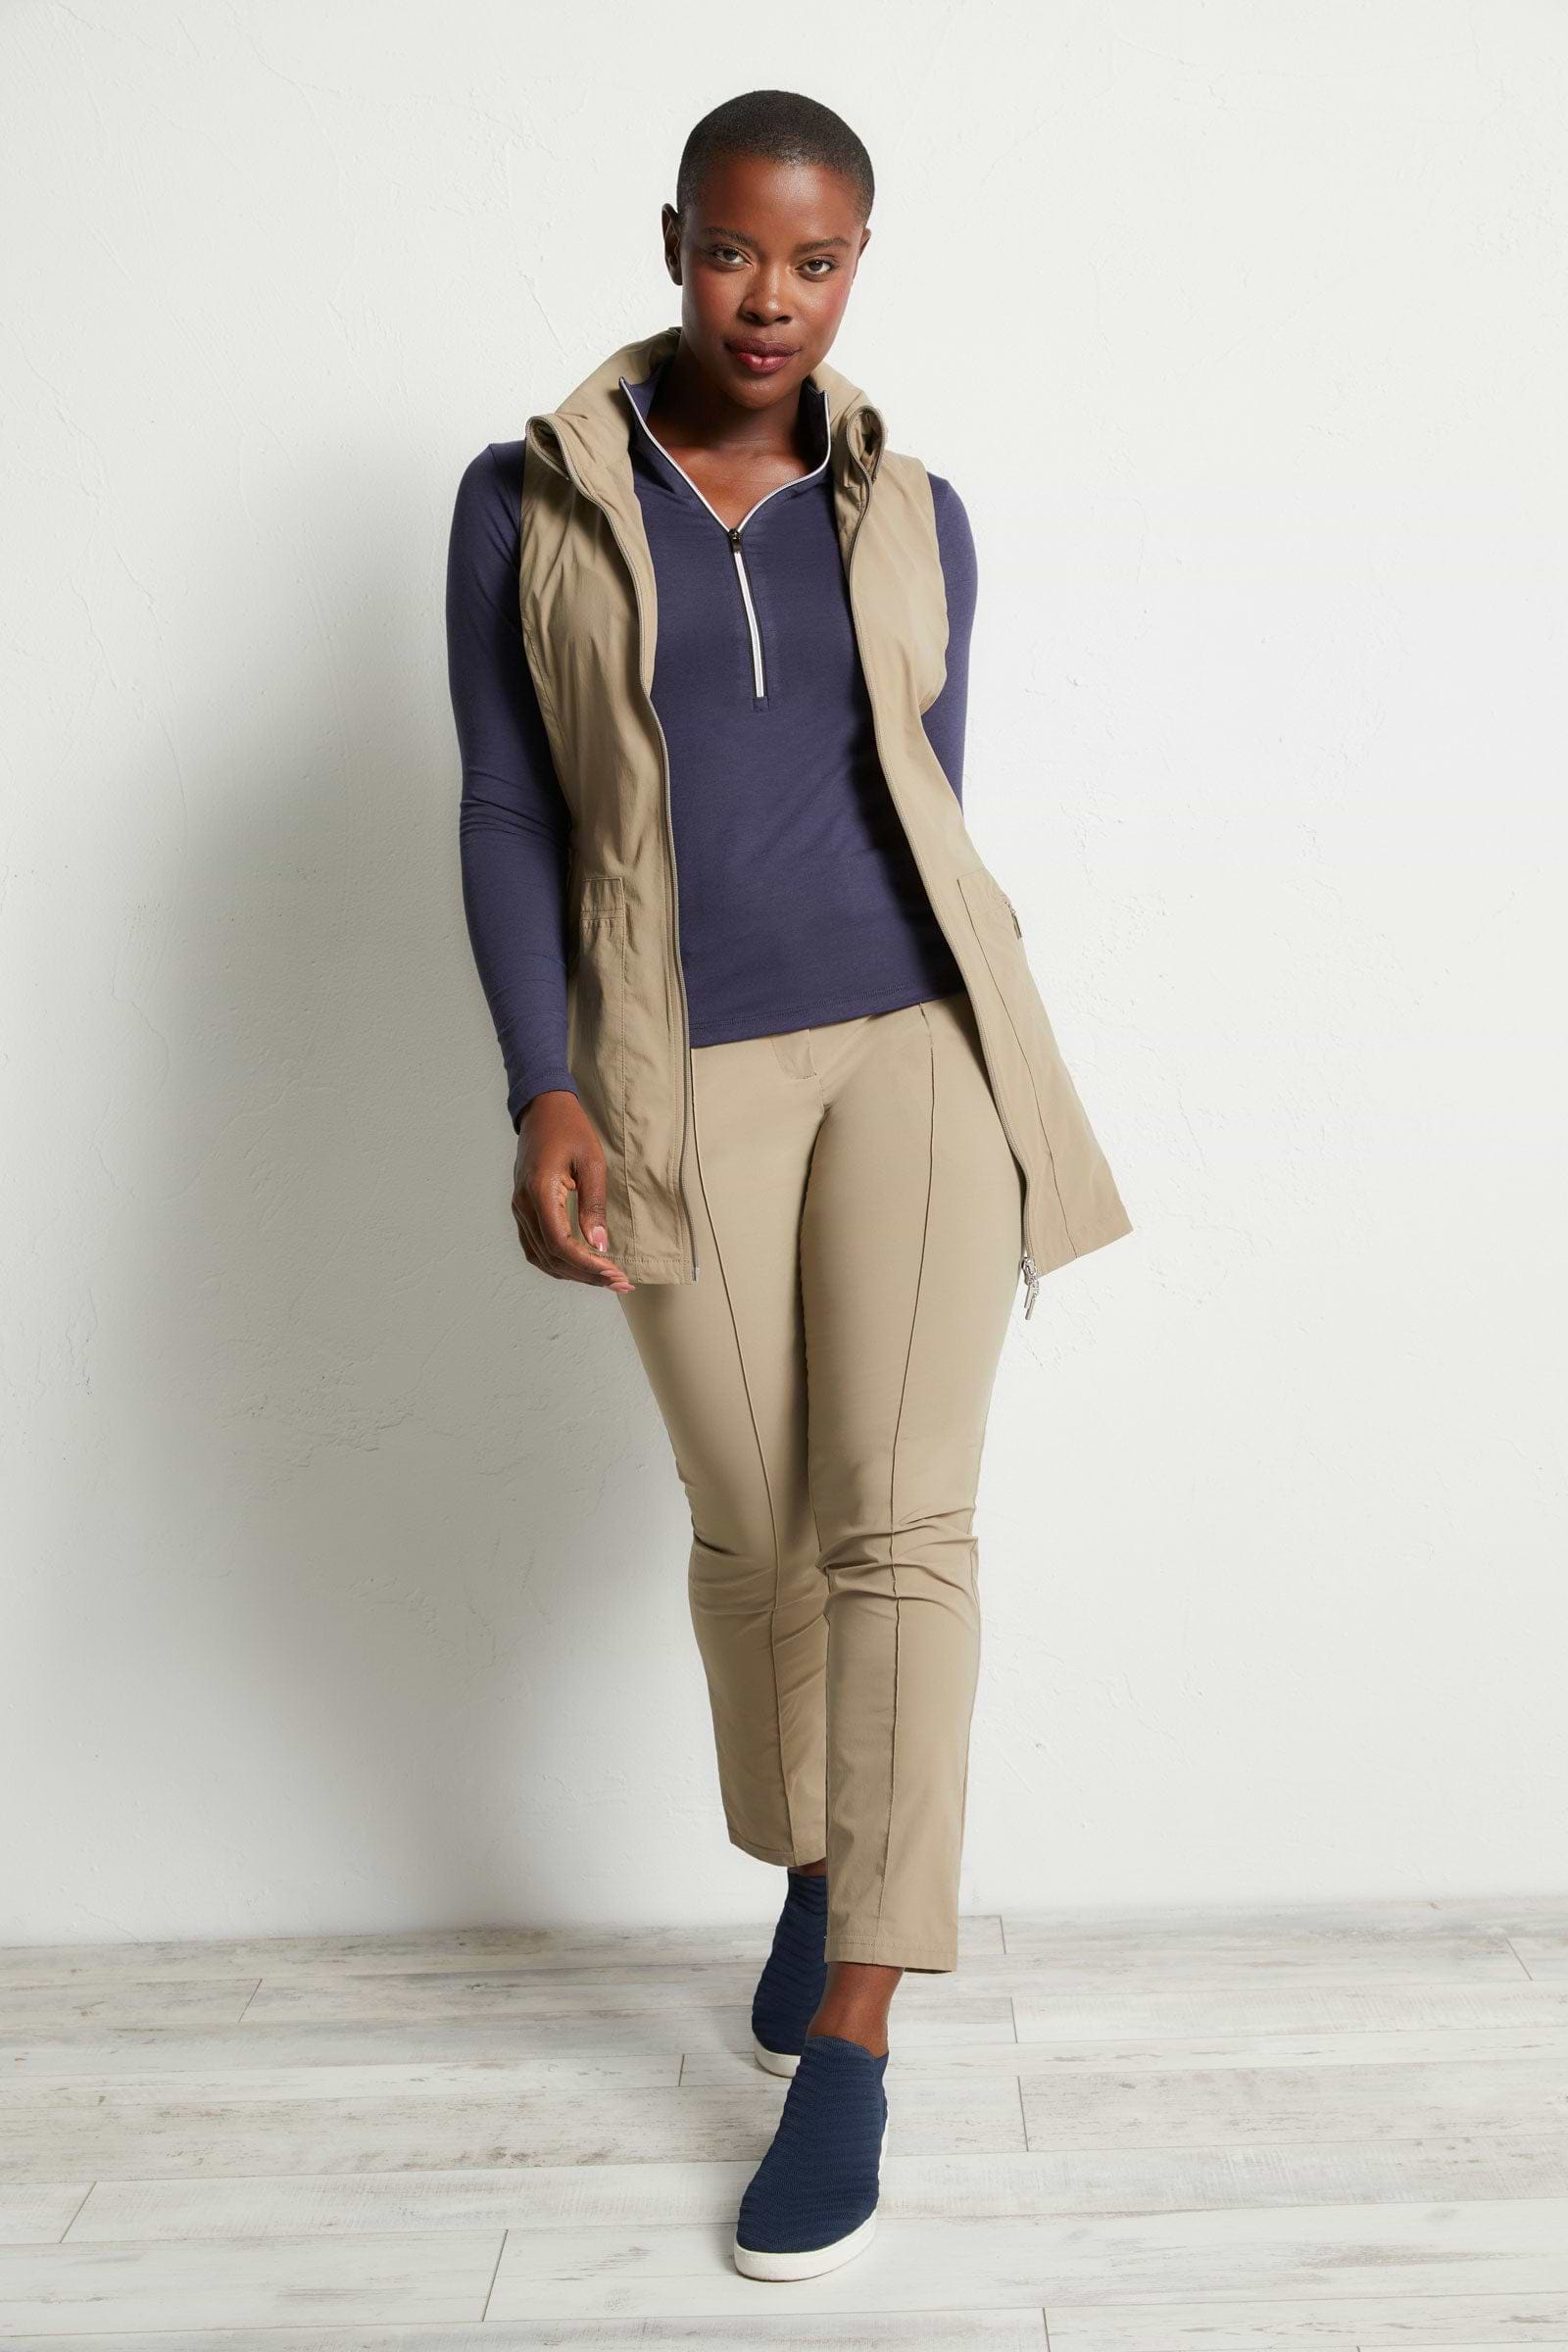 The Best Travel Vest. Woman Showing the Front Profile of a Delaney Travel Vest in Khaki